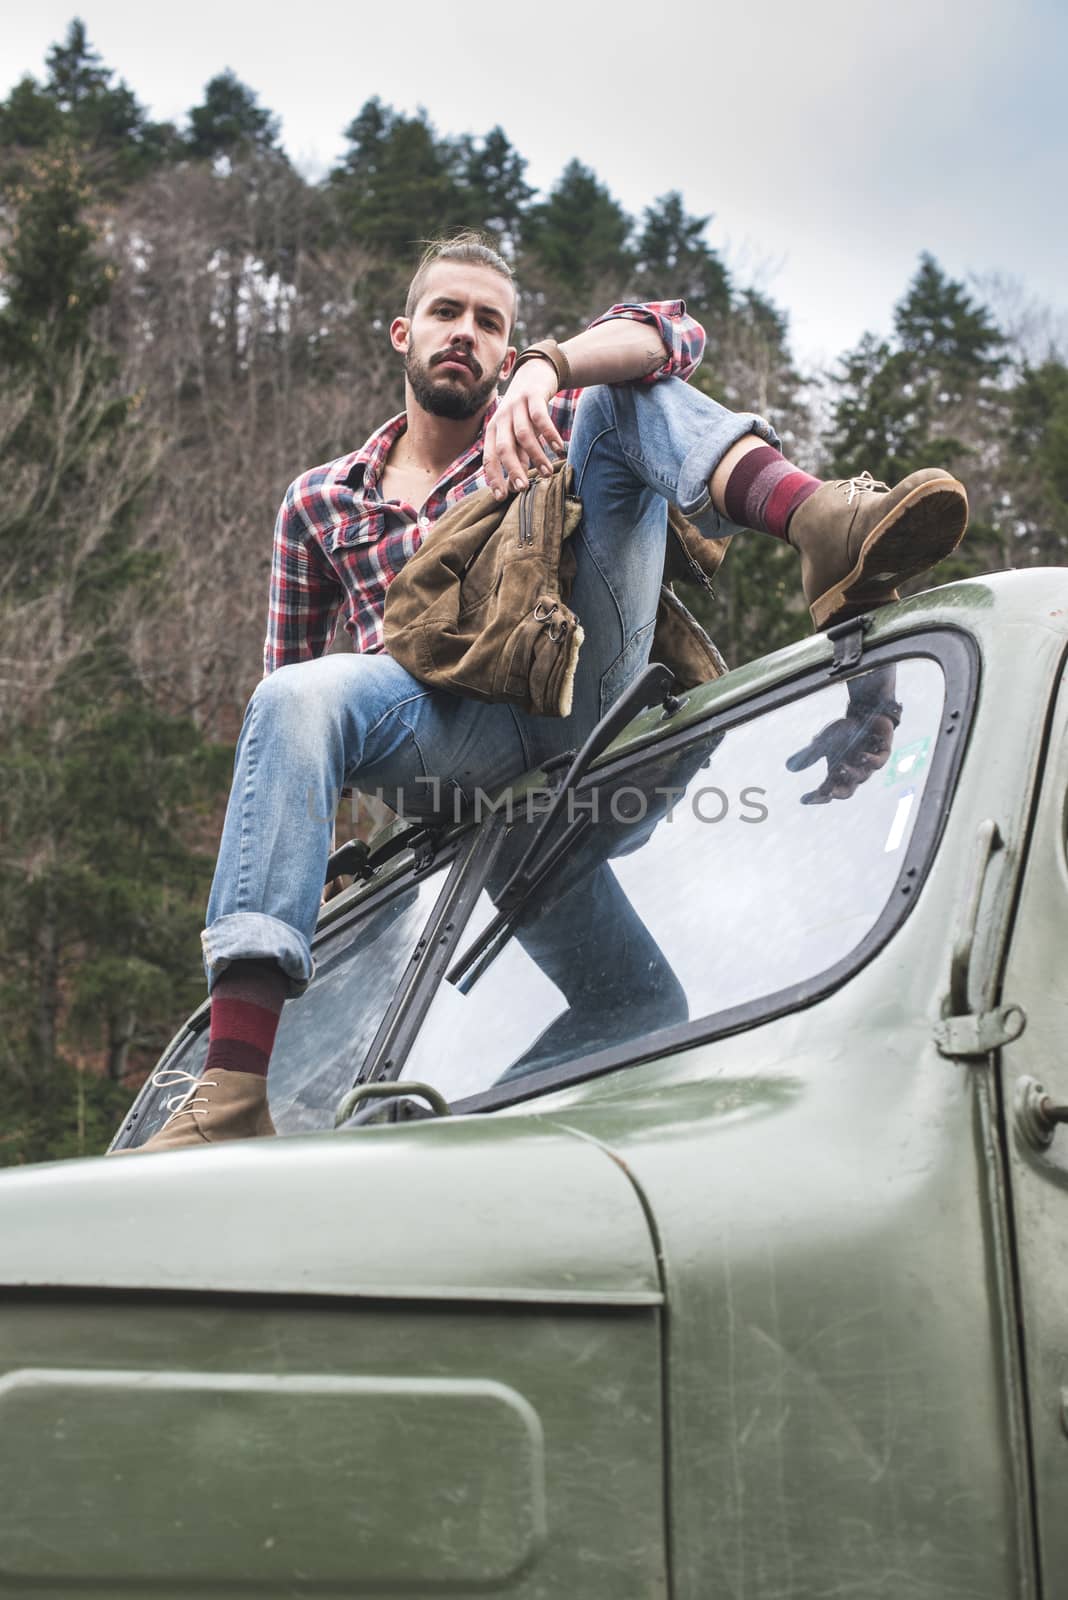 Young man on vintage truck with logs by deyan_georgiev